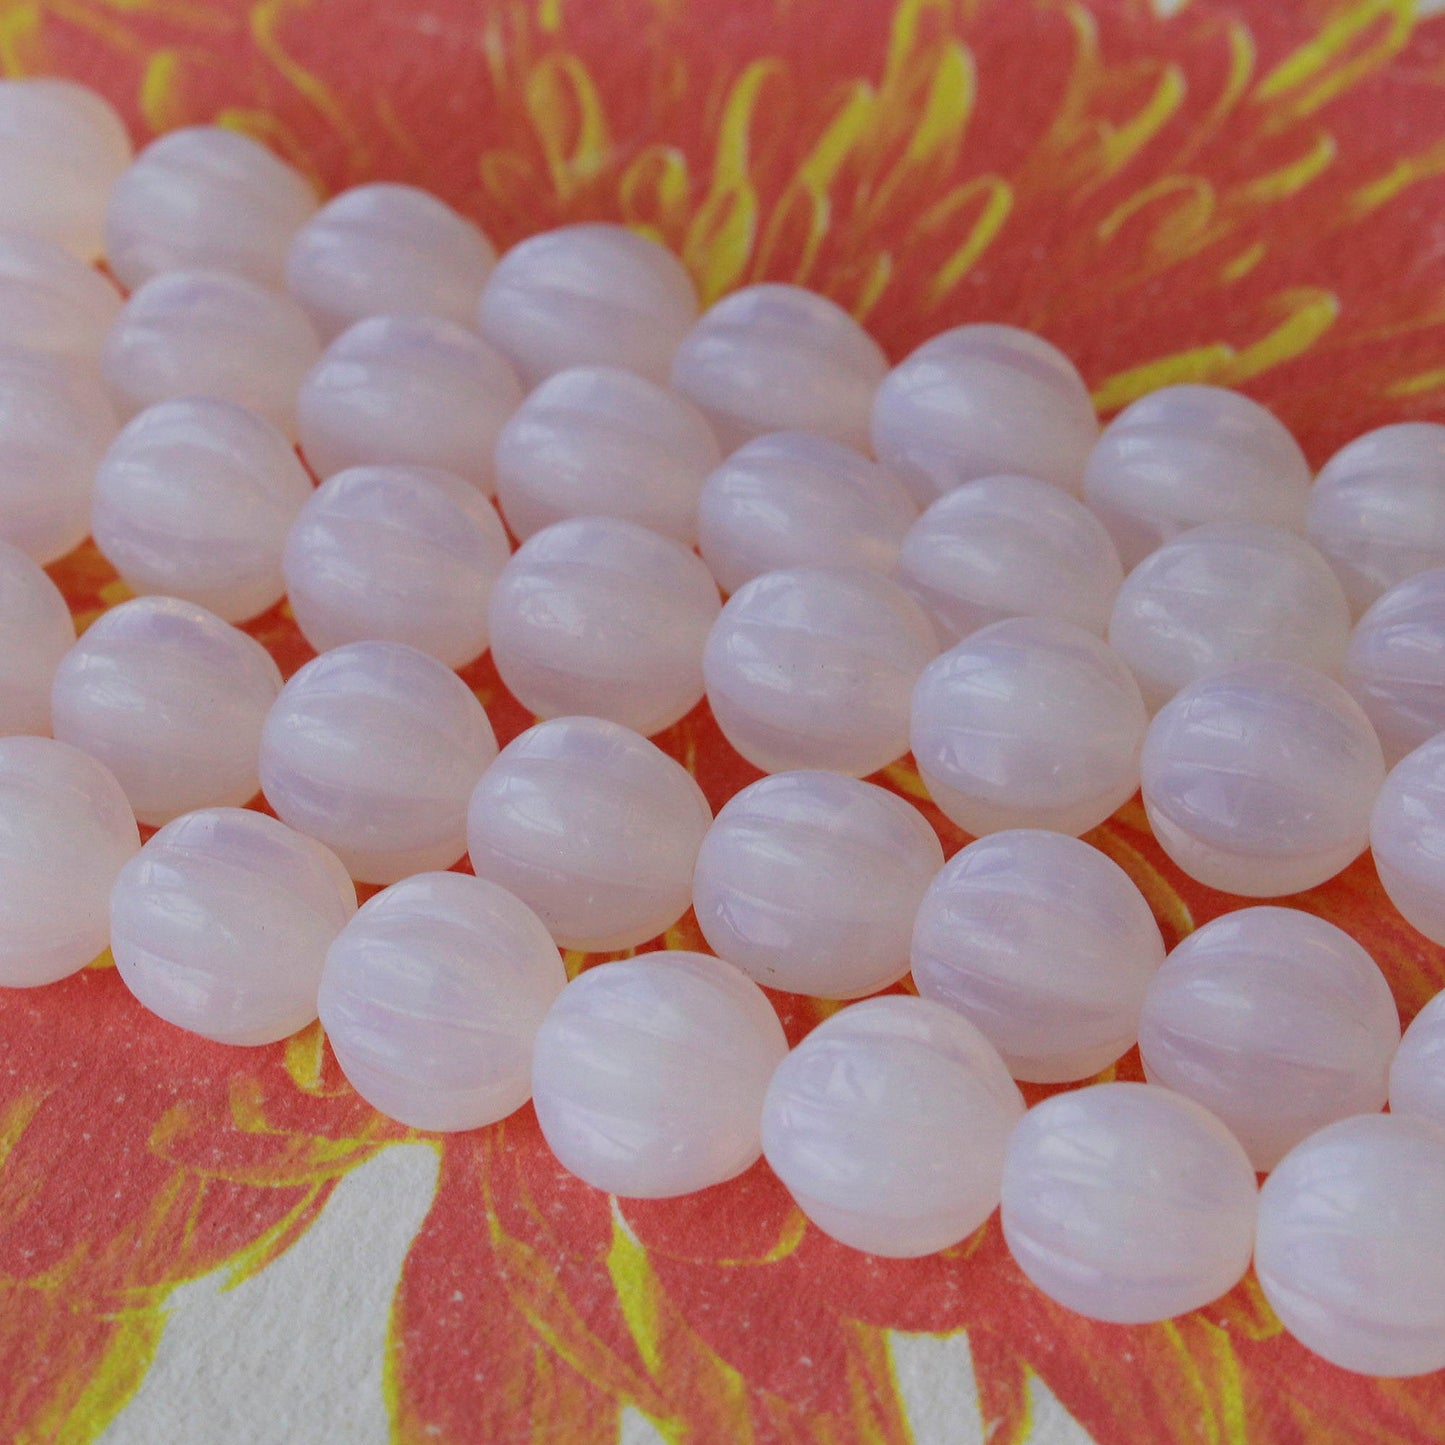 Load image into Gallery viewer, 10mm Melon Beads - Moonstone Opaline - 24 Beads
